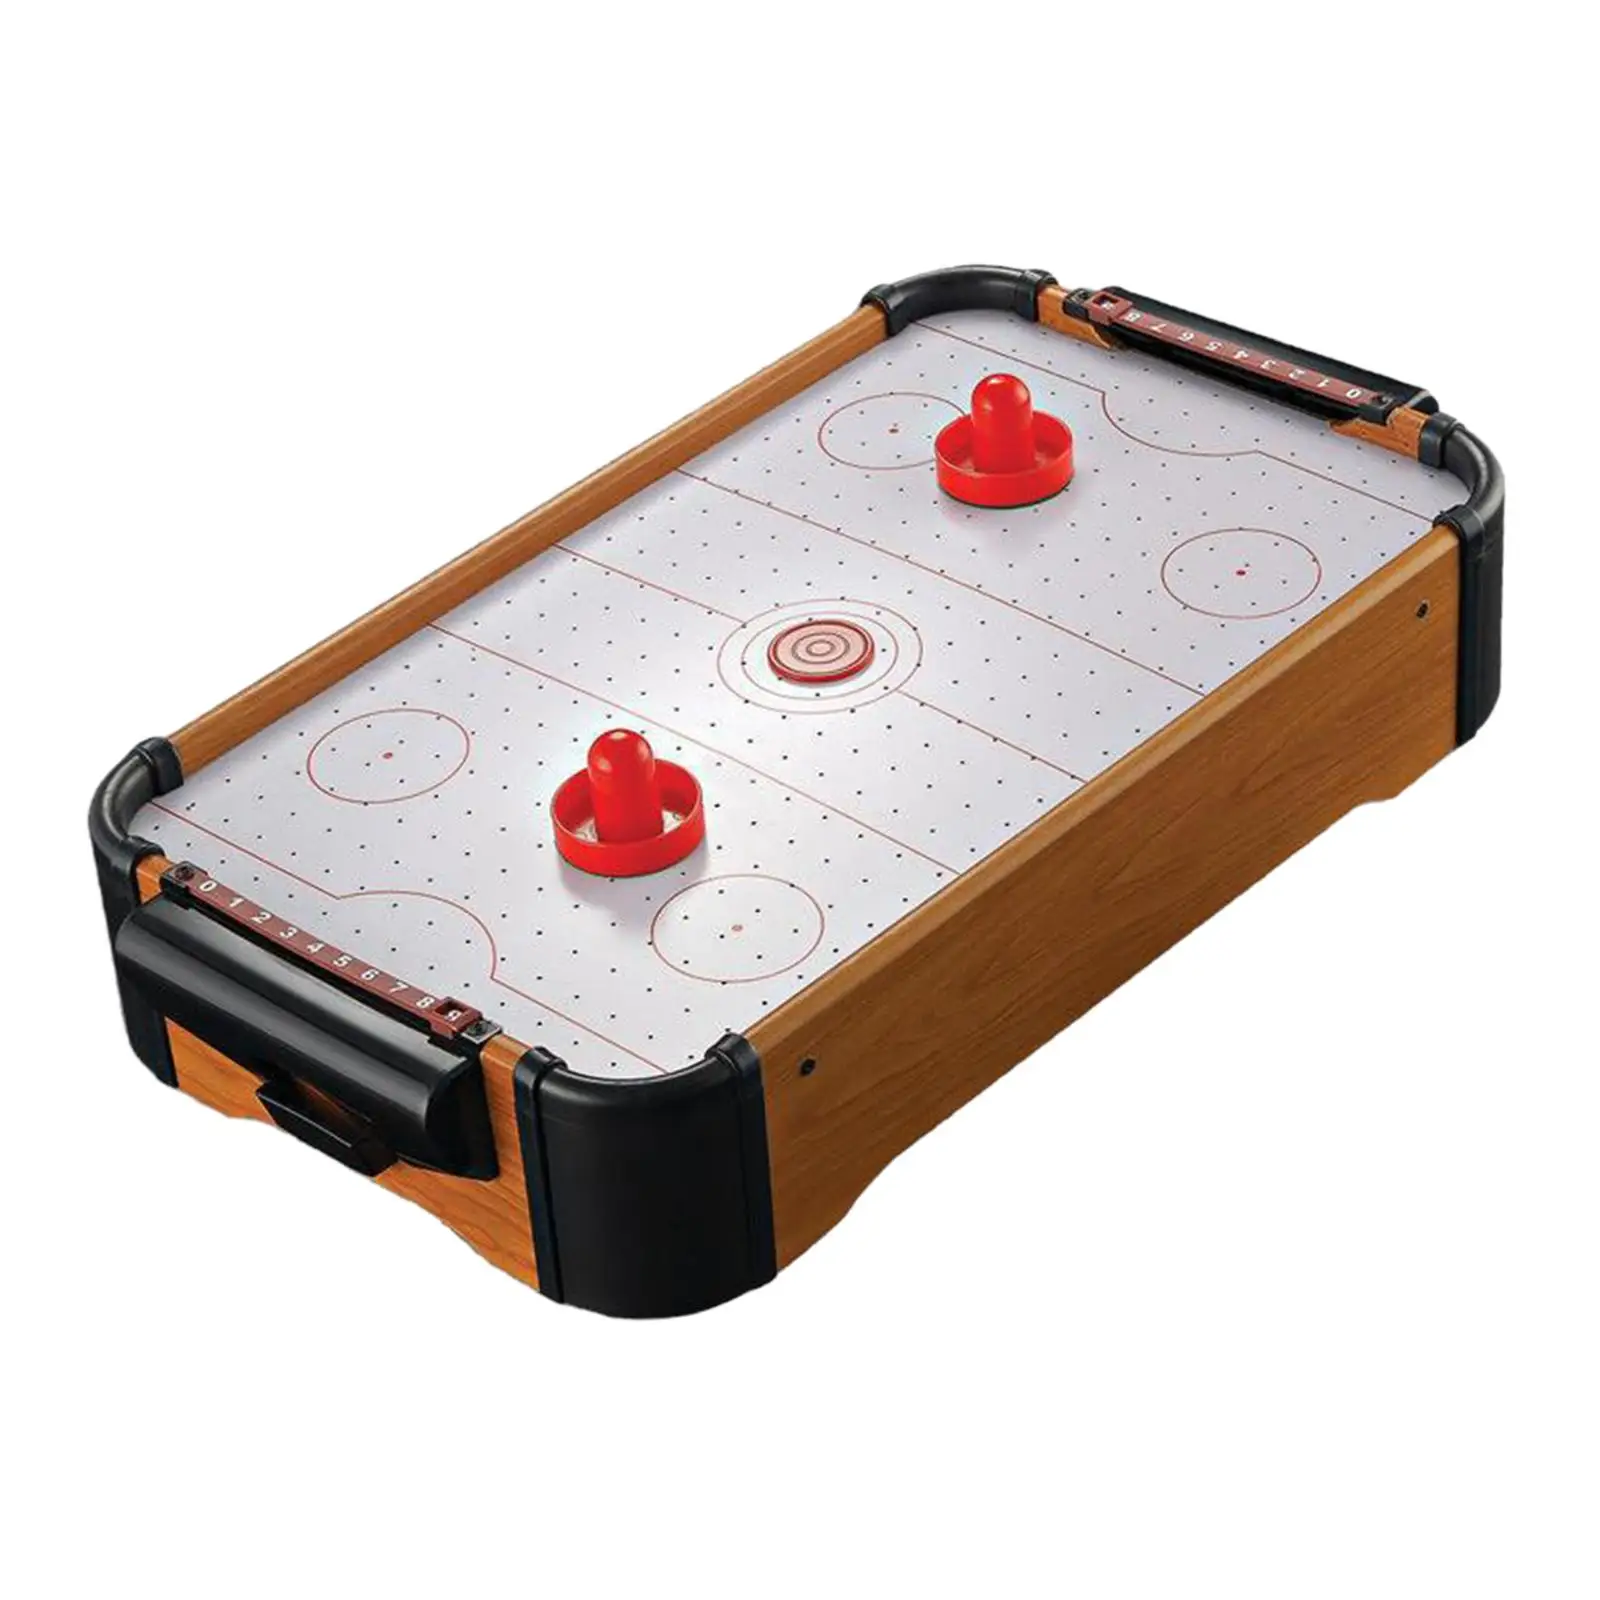 Cute Hockey Game Set Play Educational Toys family Sports for Child